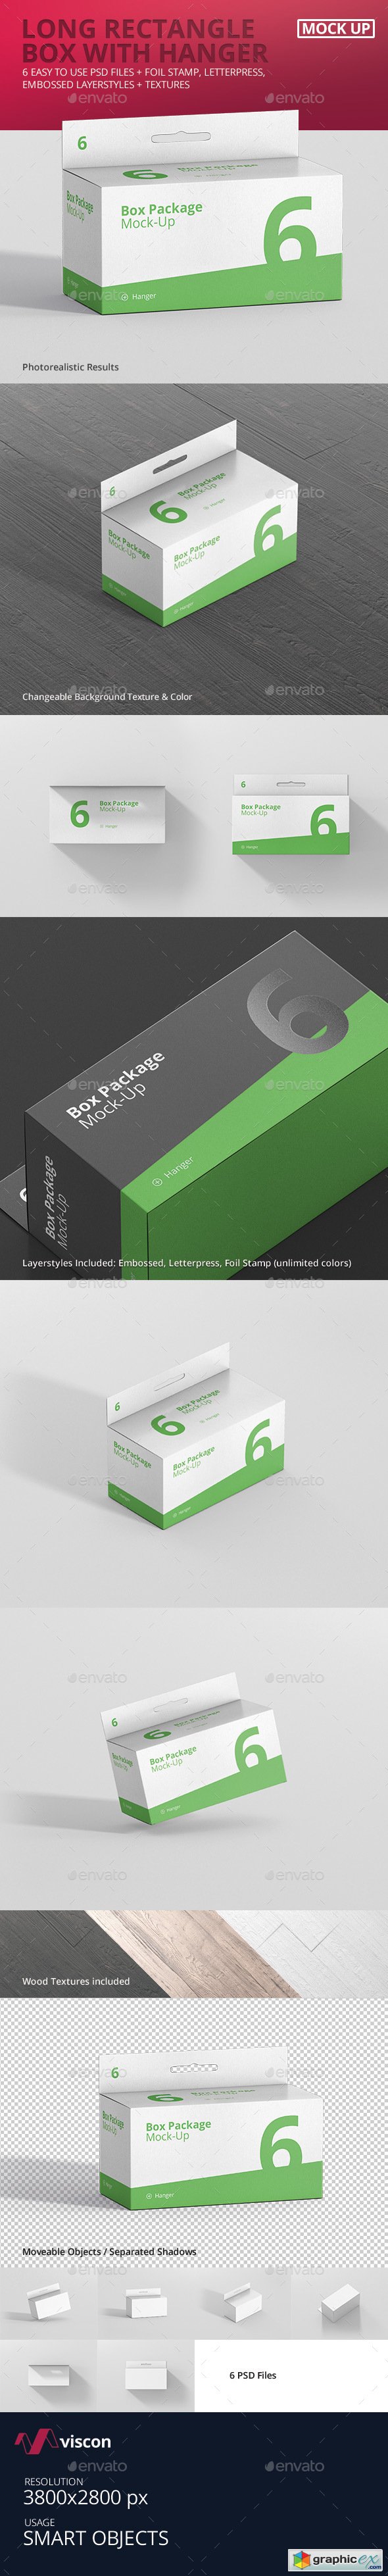 Package Box Mock-Up - Long Rectangle with Hanger